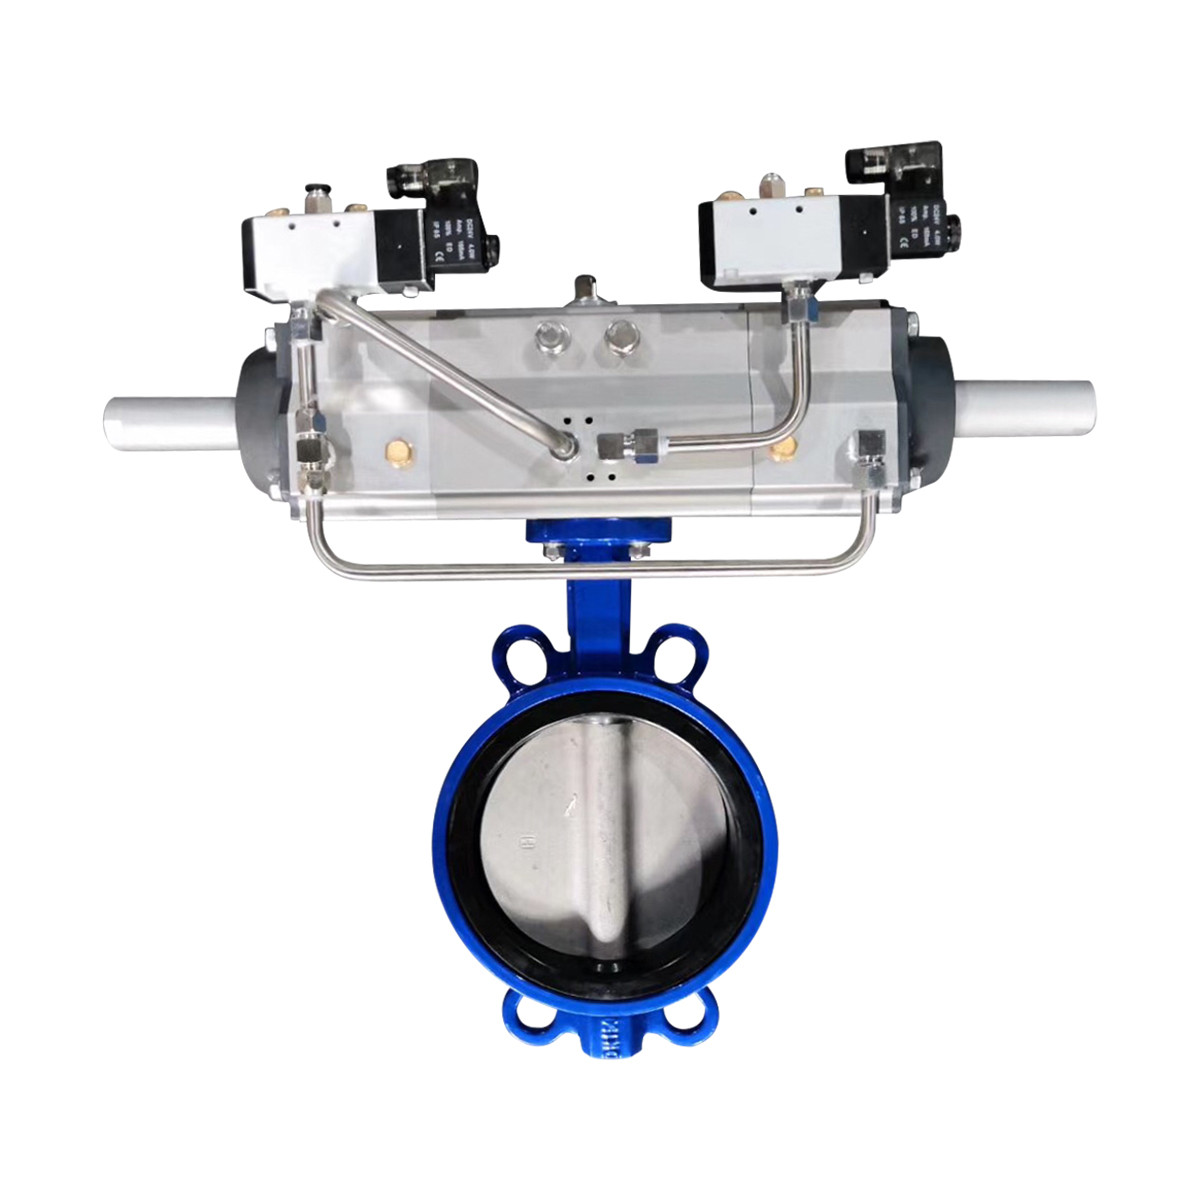 Pneumatic concentric Butterfly Valve with 3 position actuator